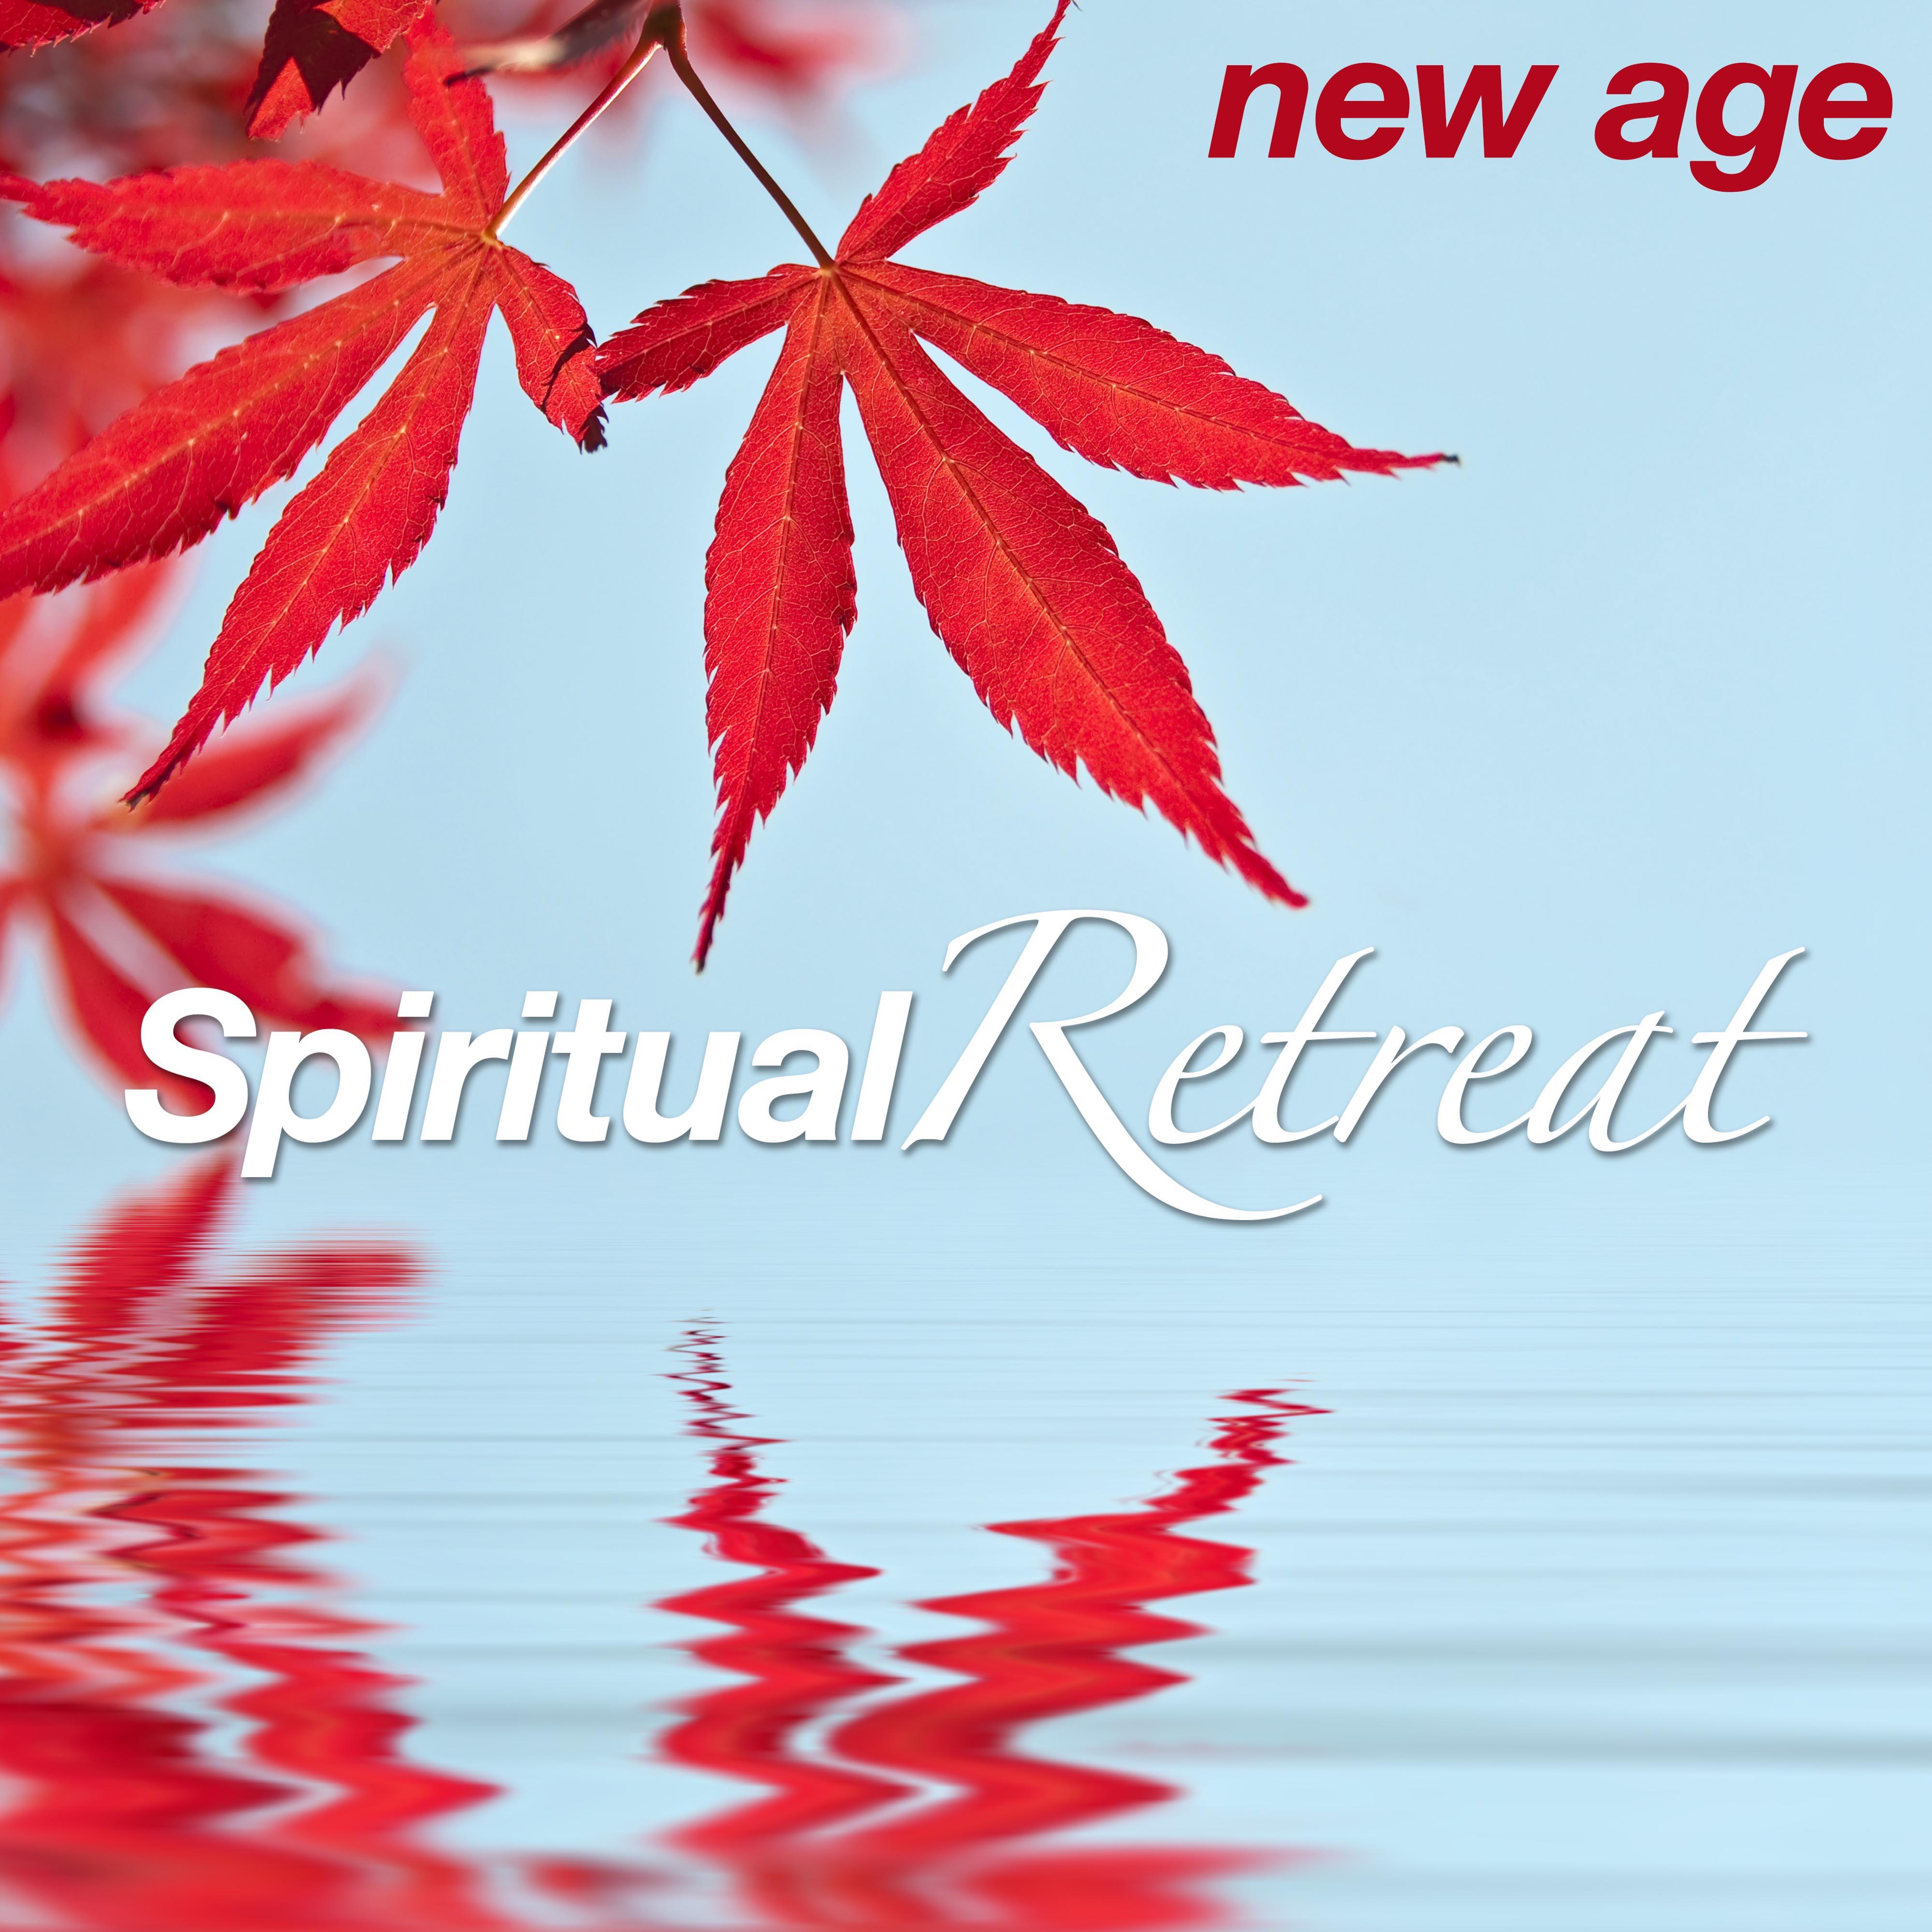 Spiritual Retreat: Enjoy our Virtual Tour towards Spiritual Awakening with the Best Relaxing New Age Music with Soothing Sounds of Nature including Rain, Thunderstorms and Ocean Waves